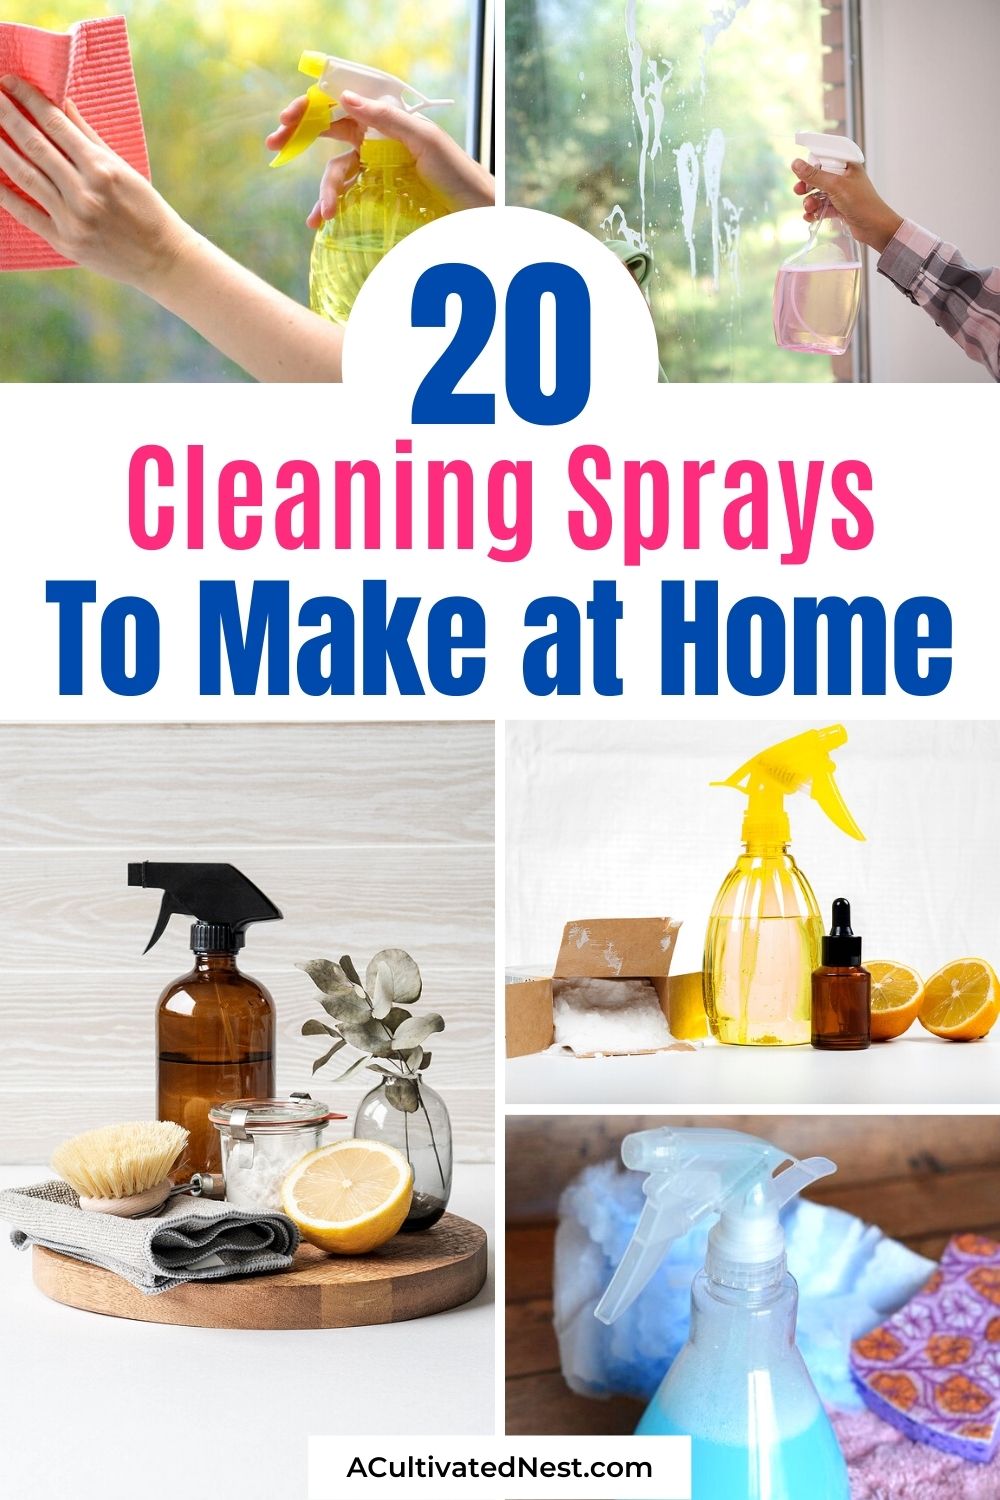 20 DIY Cleaning Sprays to Make At Home- You can easily save money and clean your home naturally with these DIY cleaning sprays! It's so easy to make effective homemade cleaners! | #homemadeCleanerRecipes #diyCleanerRecipes #frugalLivingTips #cleaningTips #ACultivatedNest